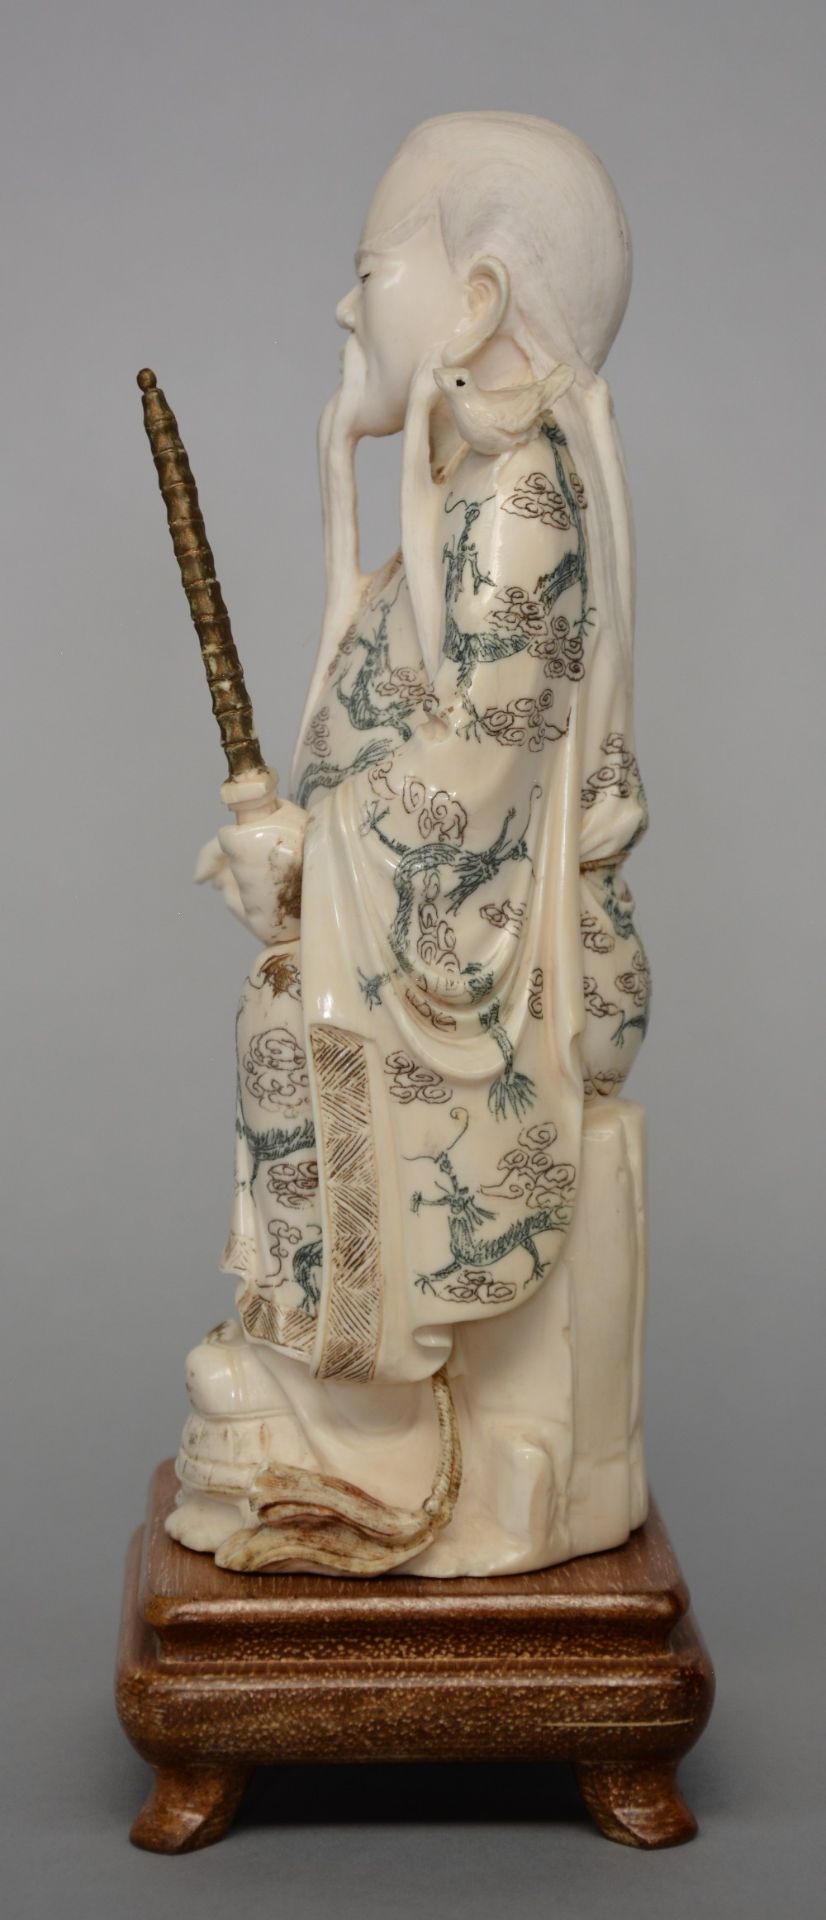 A Chinese ivory sculpture of a deity, on wooden base, scrimshaw decorated, first half 20thC, H 25 cm - Image 2 of 4